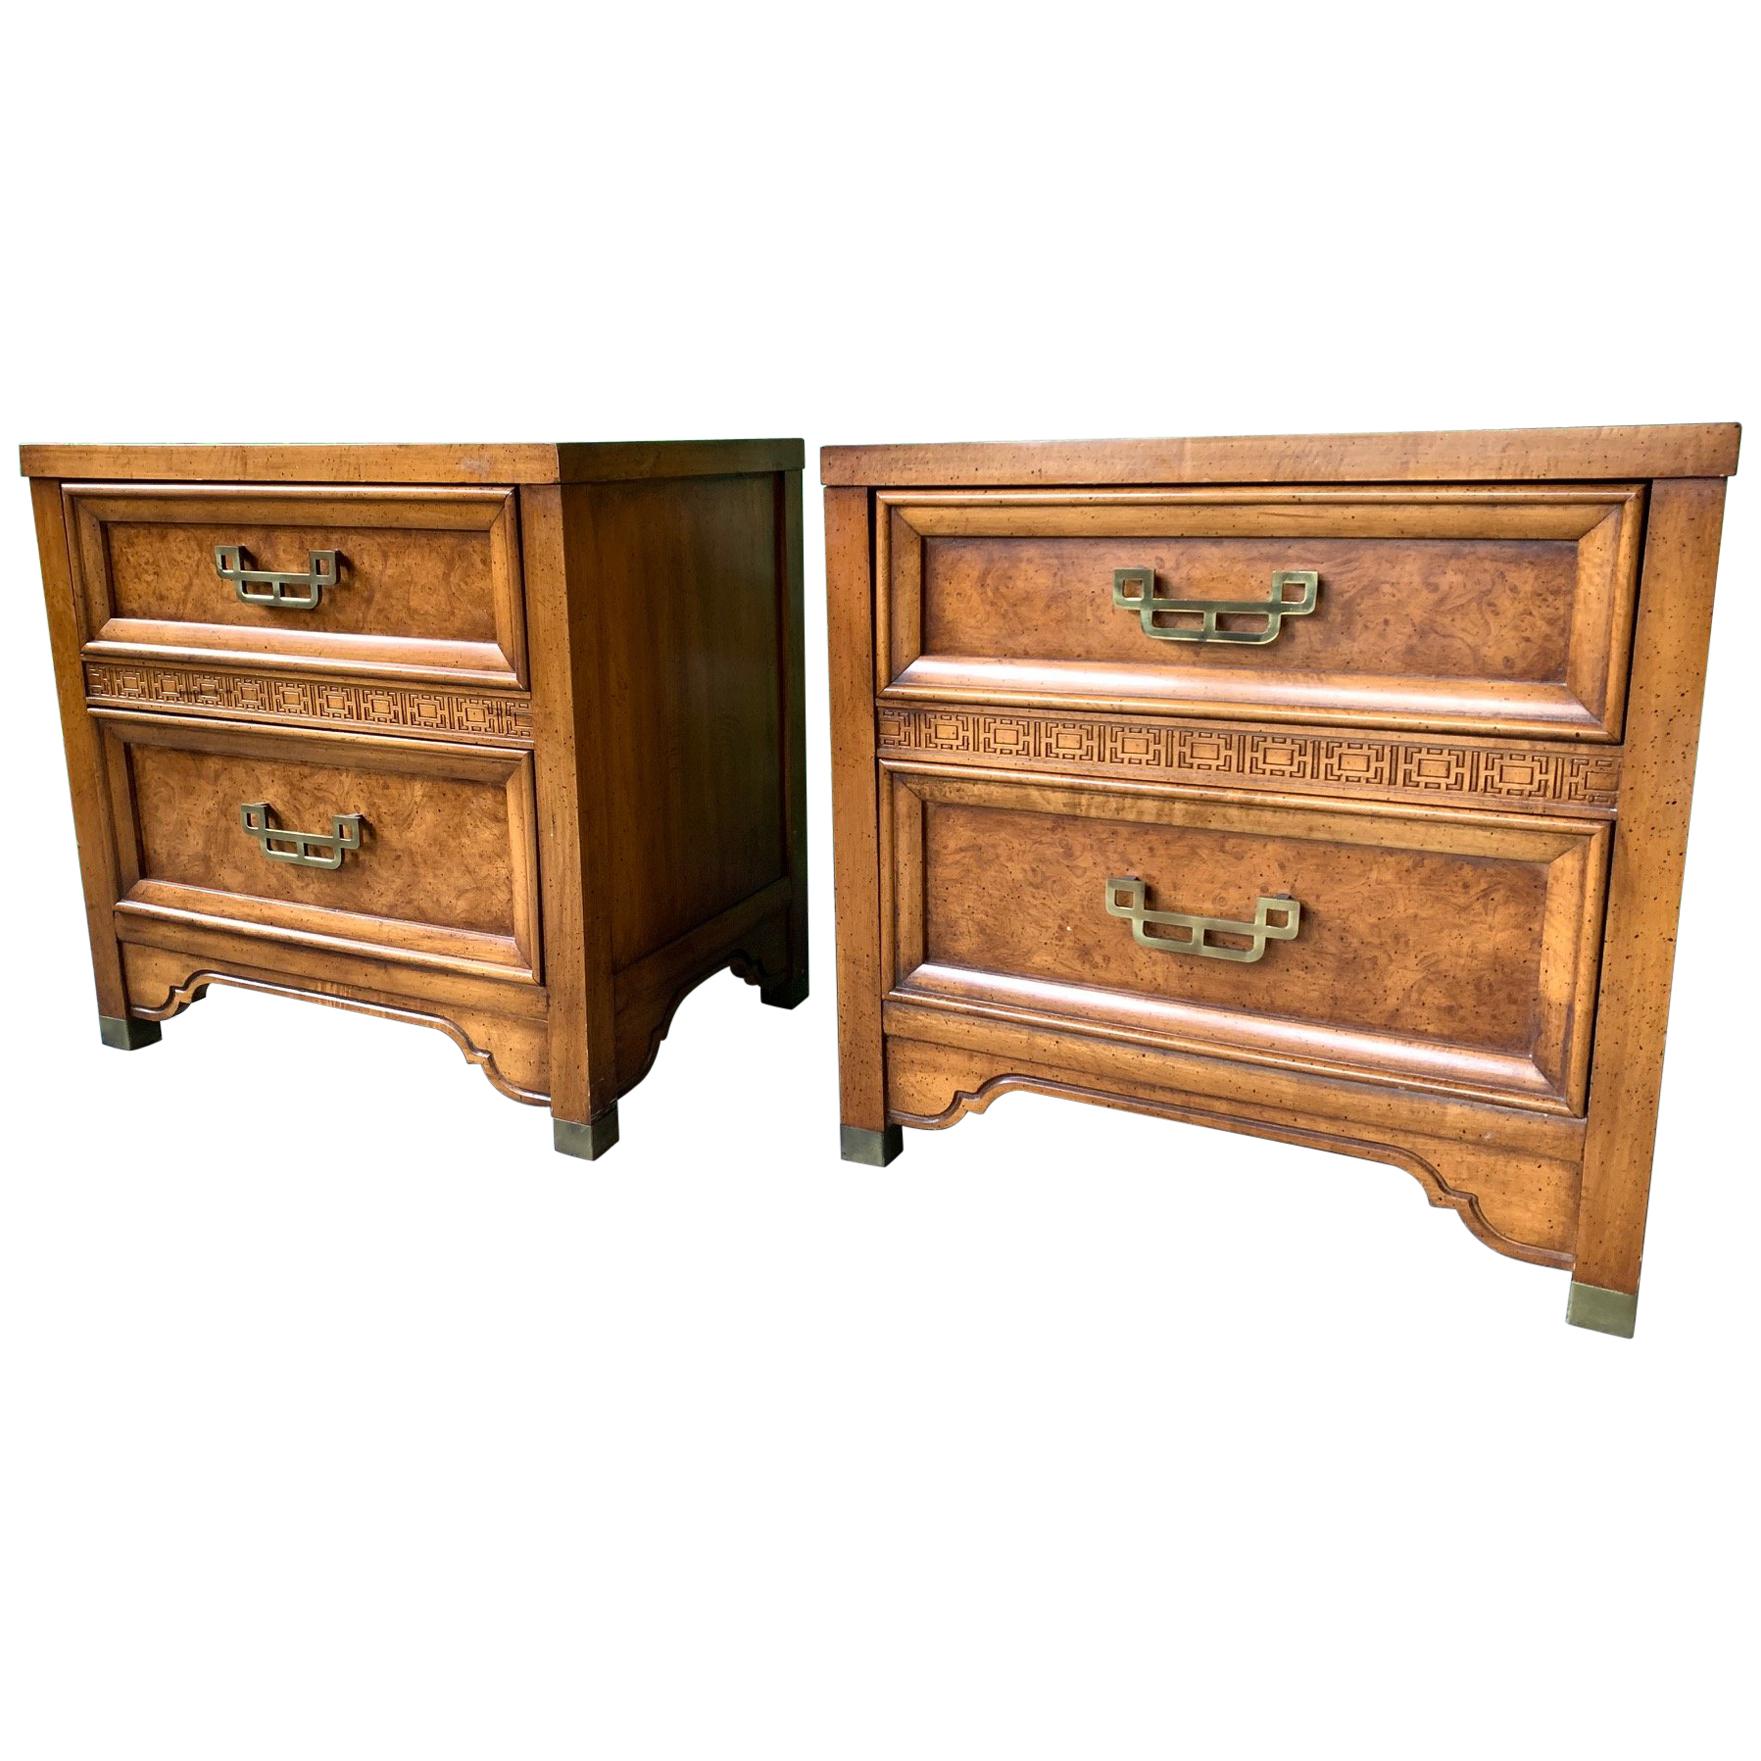 Pair of Burl Nightstands by Henry Link from the Mandarin Collection